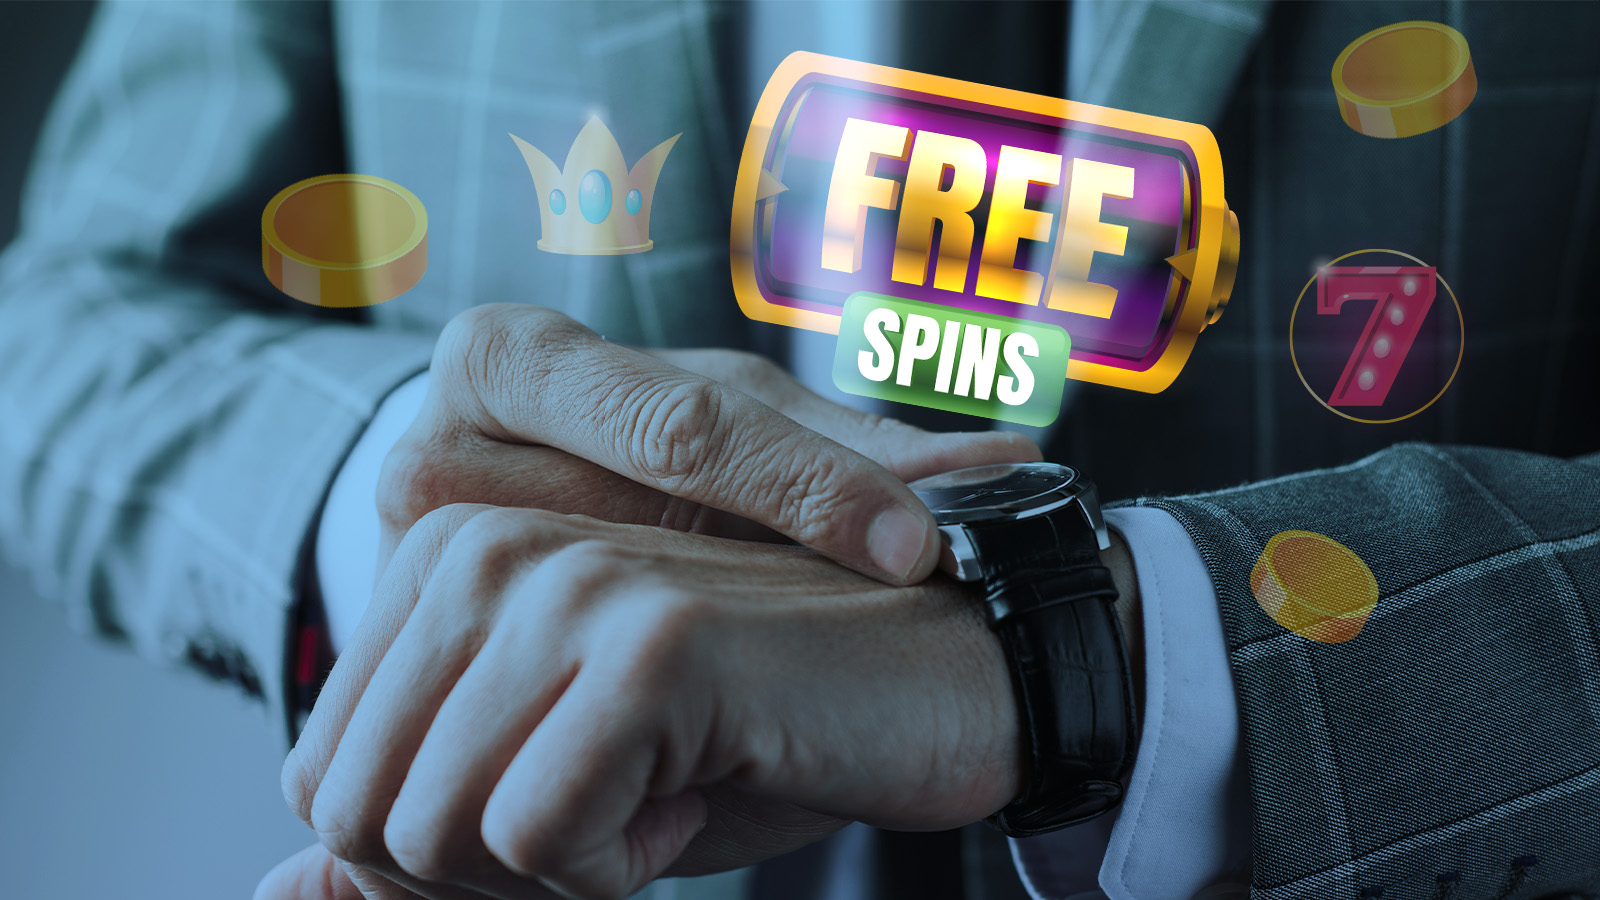 How Long Do I Have to Use Free Spin Offers